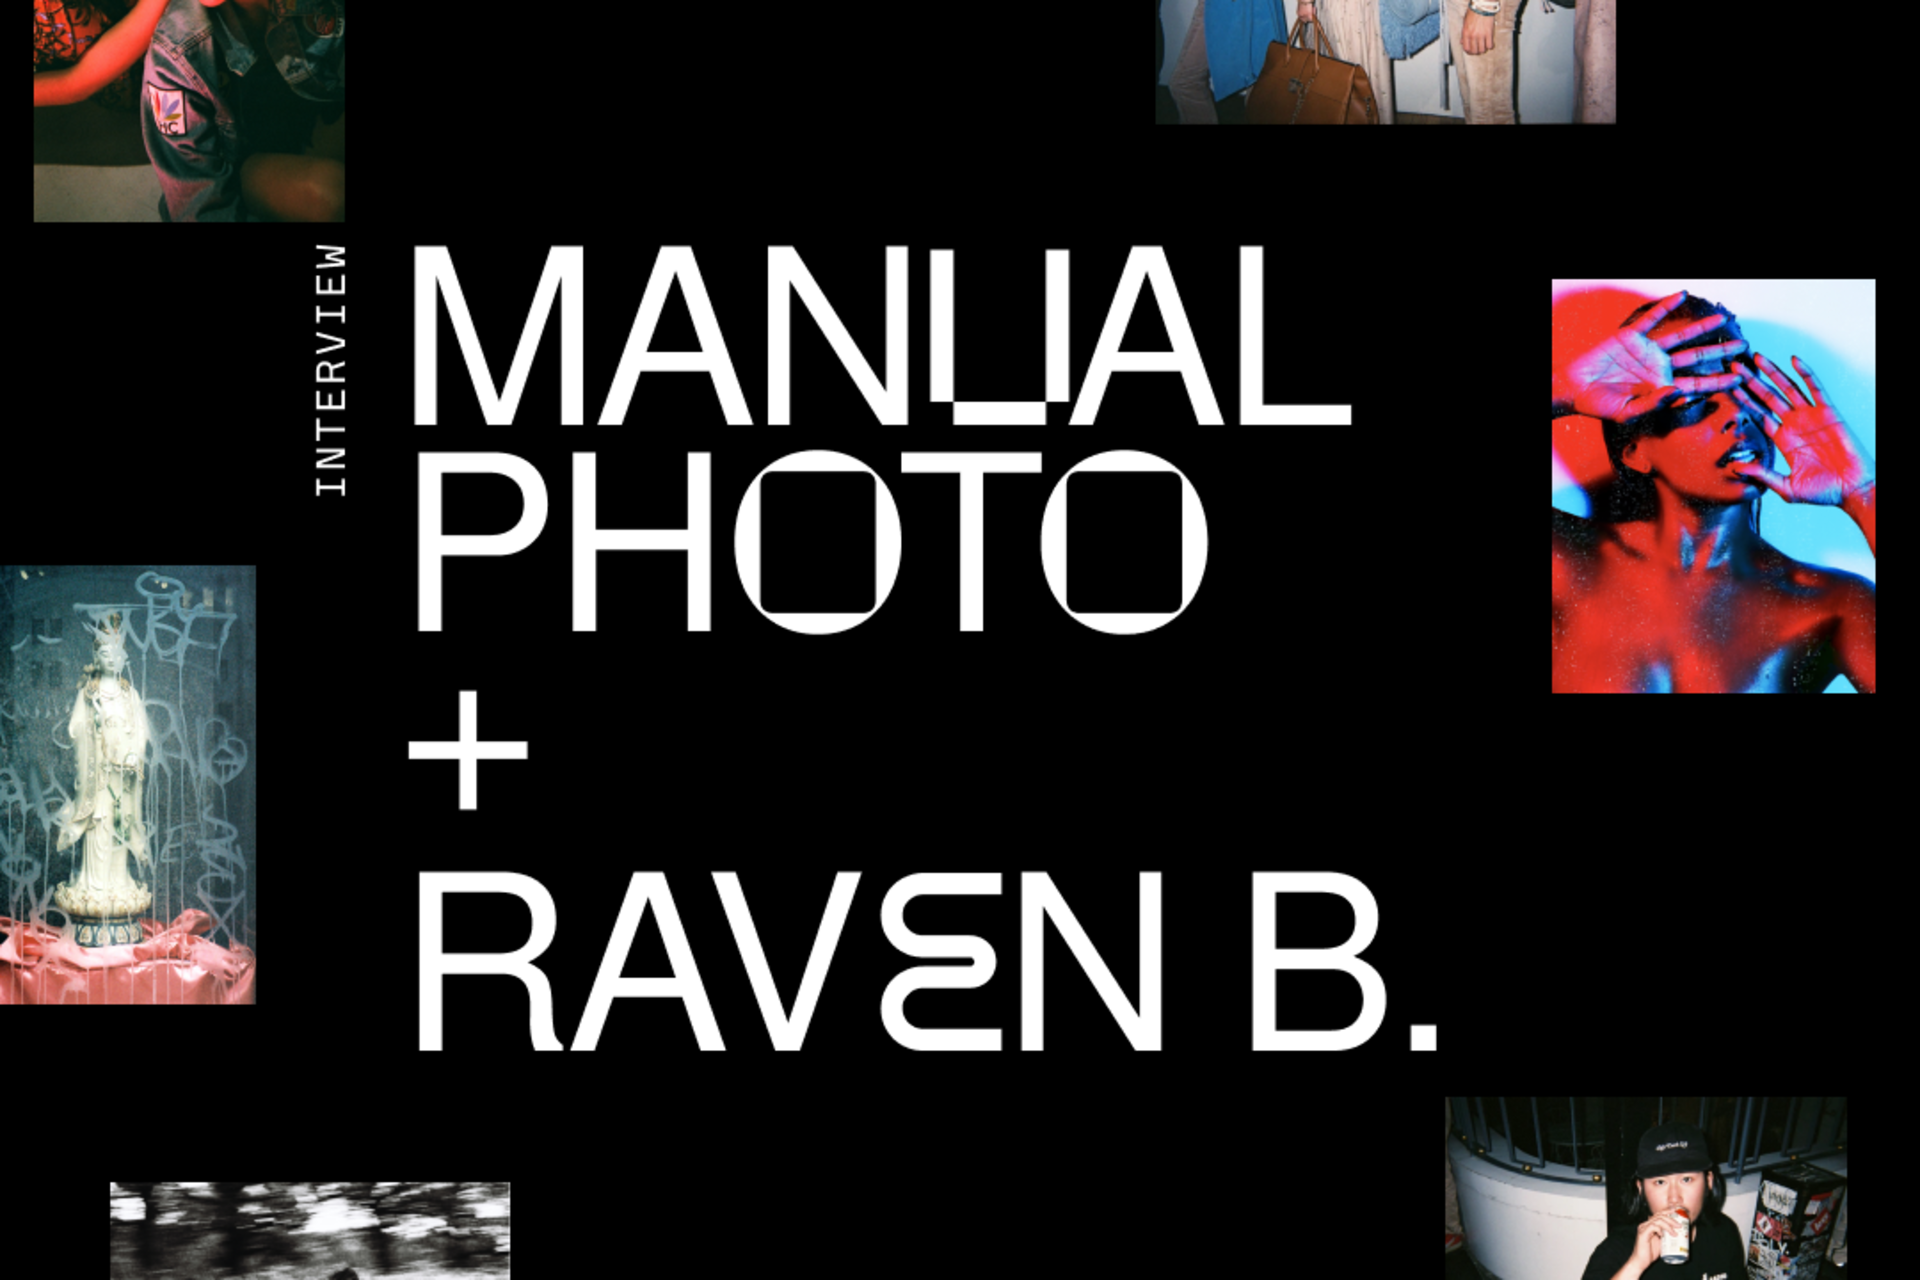 Manual Photo + Raven B. on picturing a whole new world.